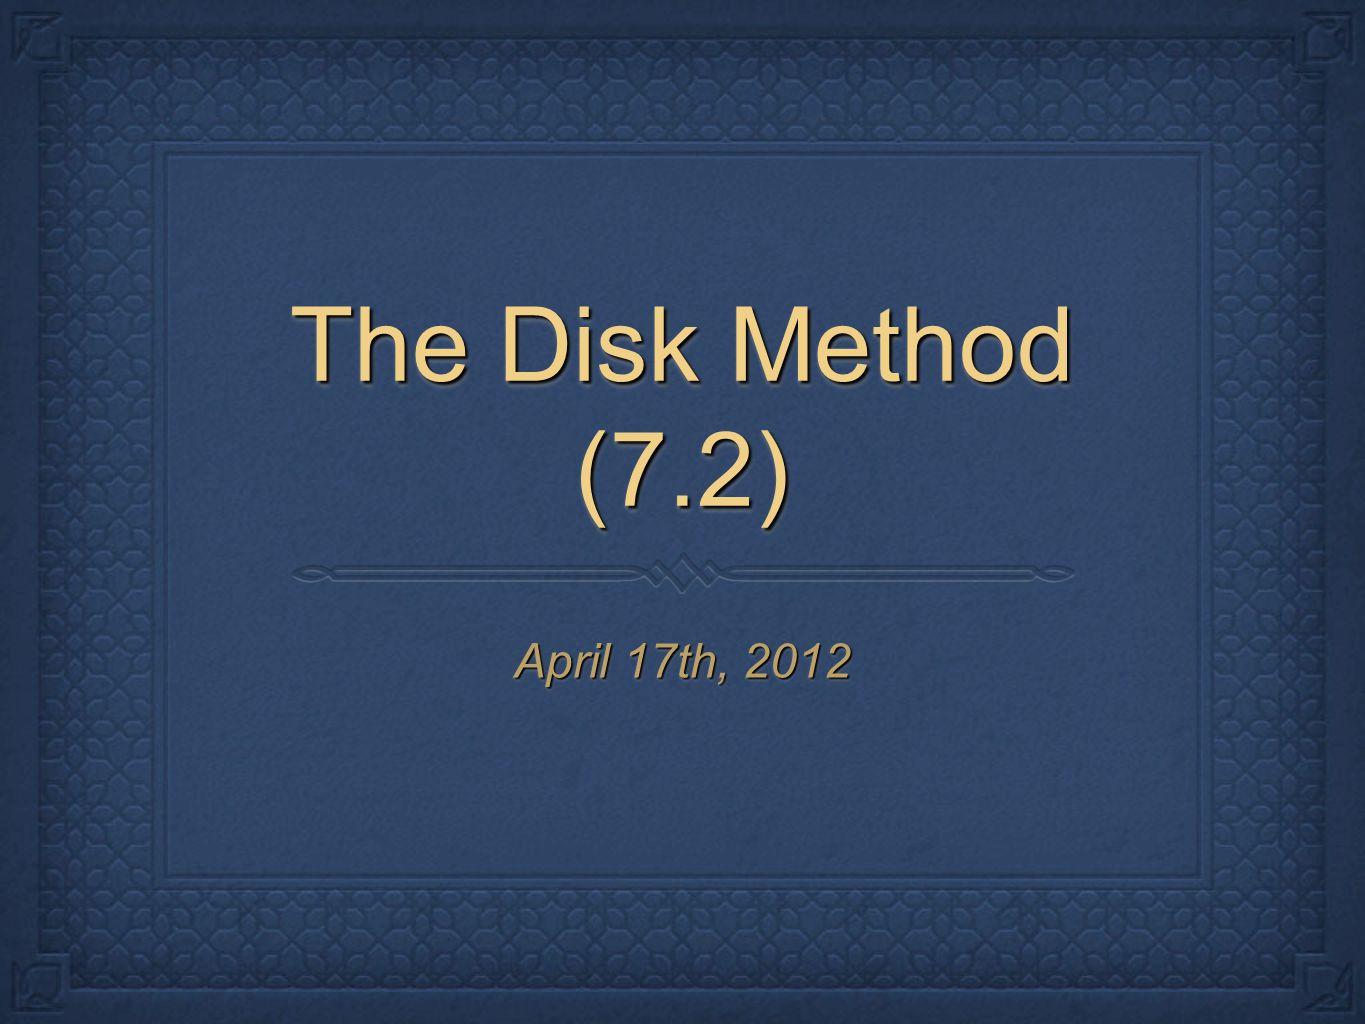 The Disk Method (7.2) April 17th, 2012